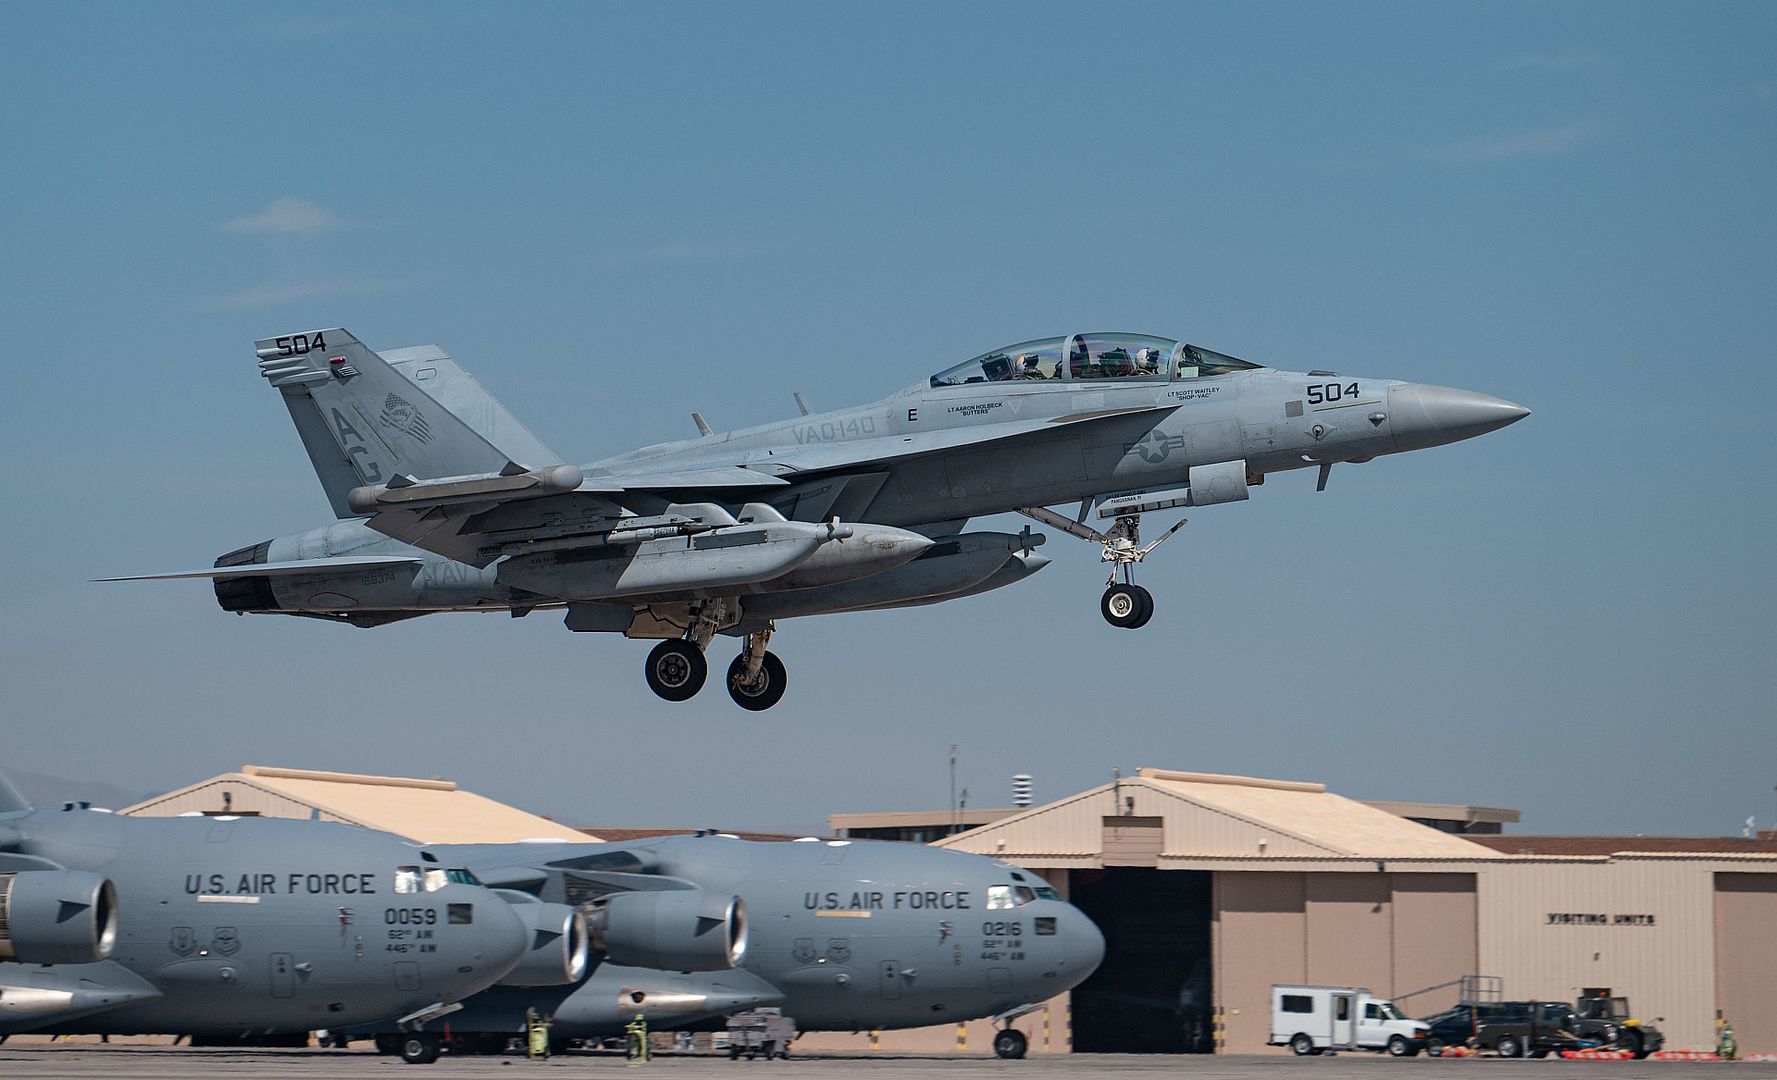 18G Aircraft Assigned To Naval Aviation Warfighting Development Center At Naval Air Station Fallon Nevada